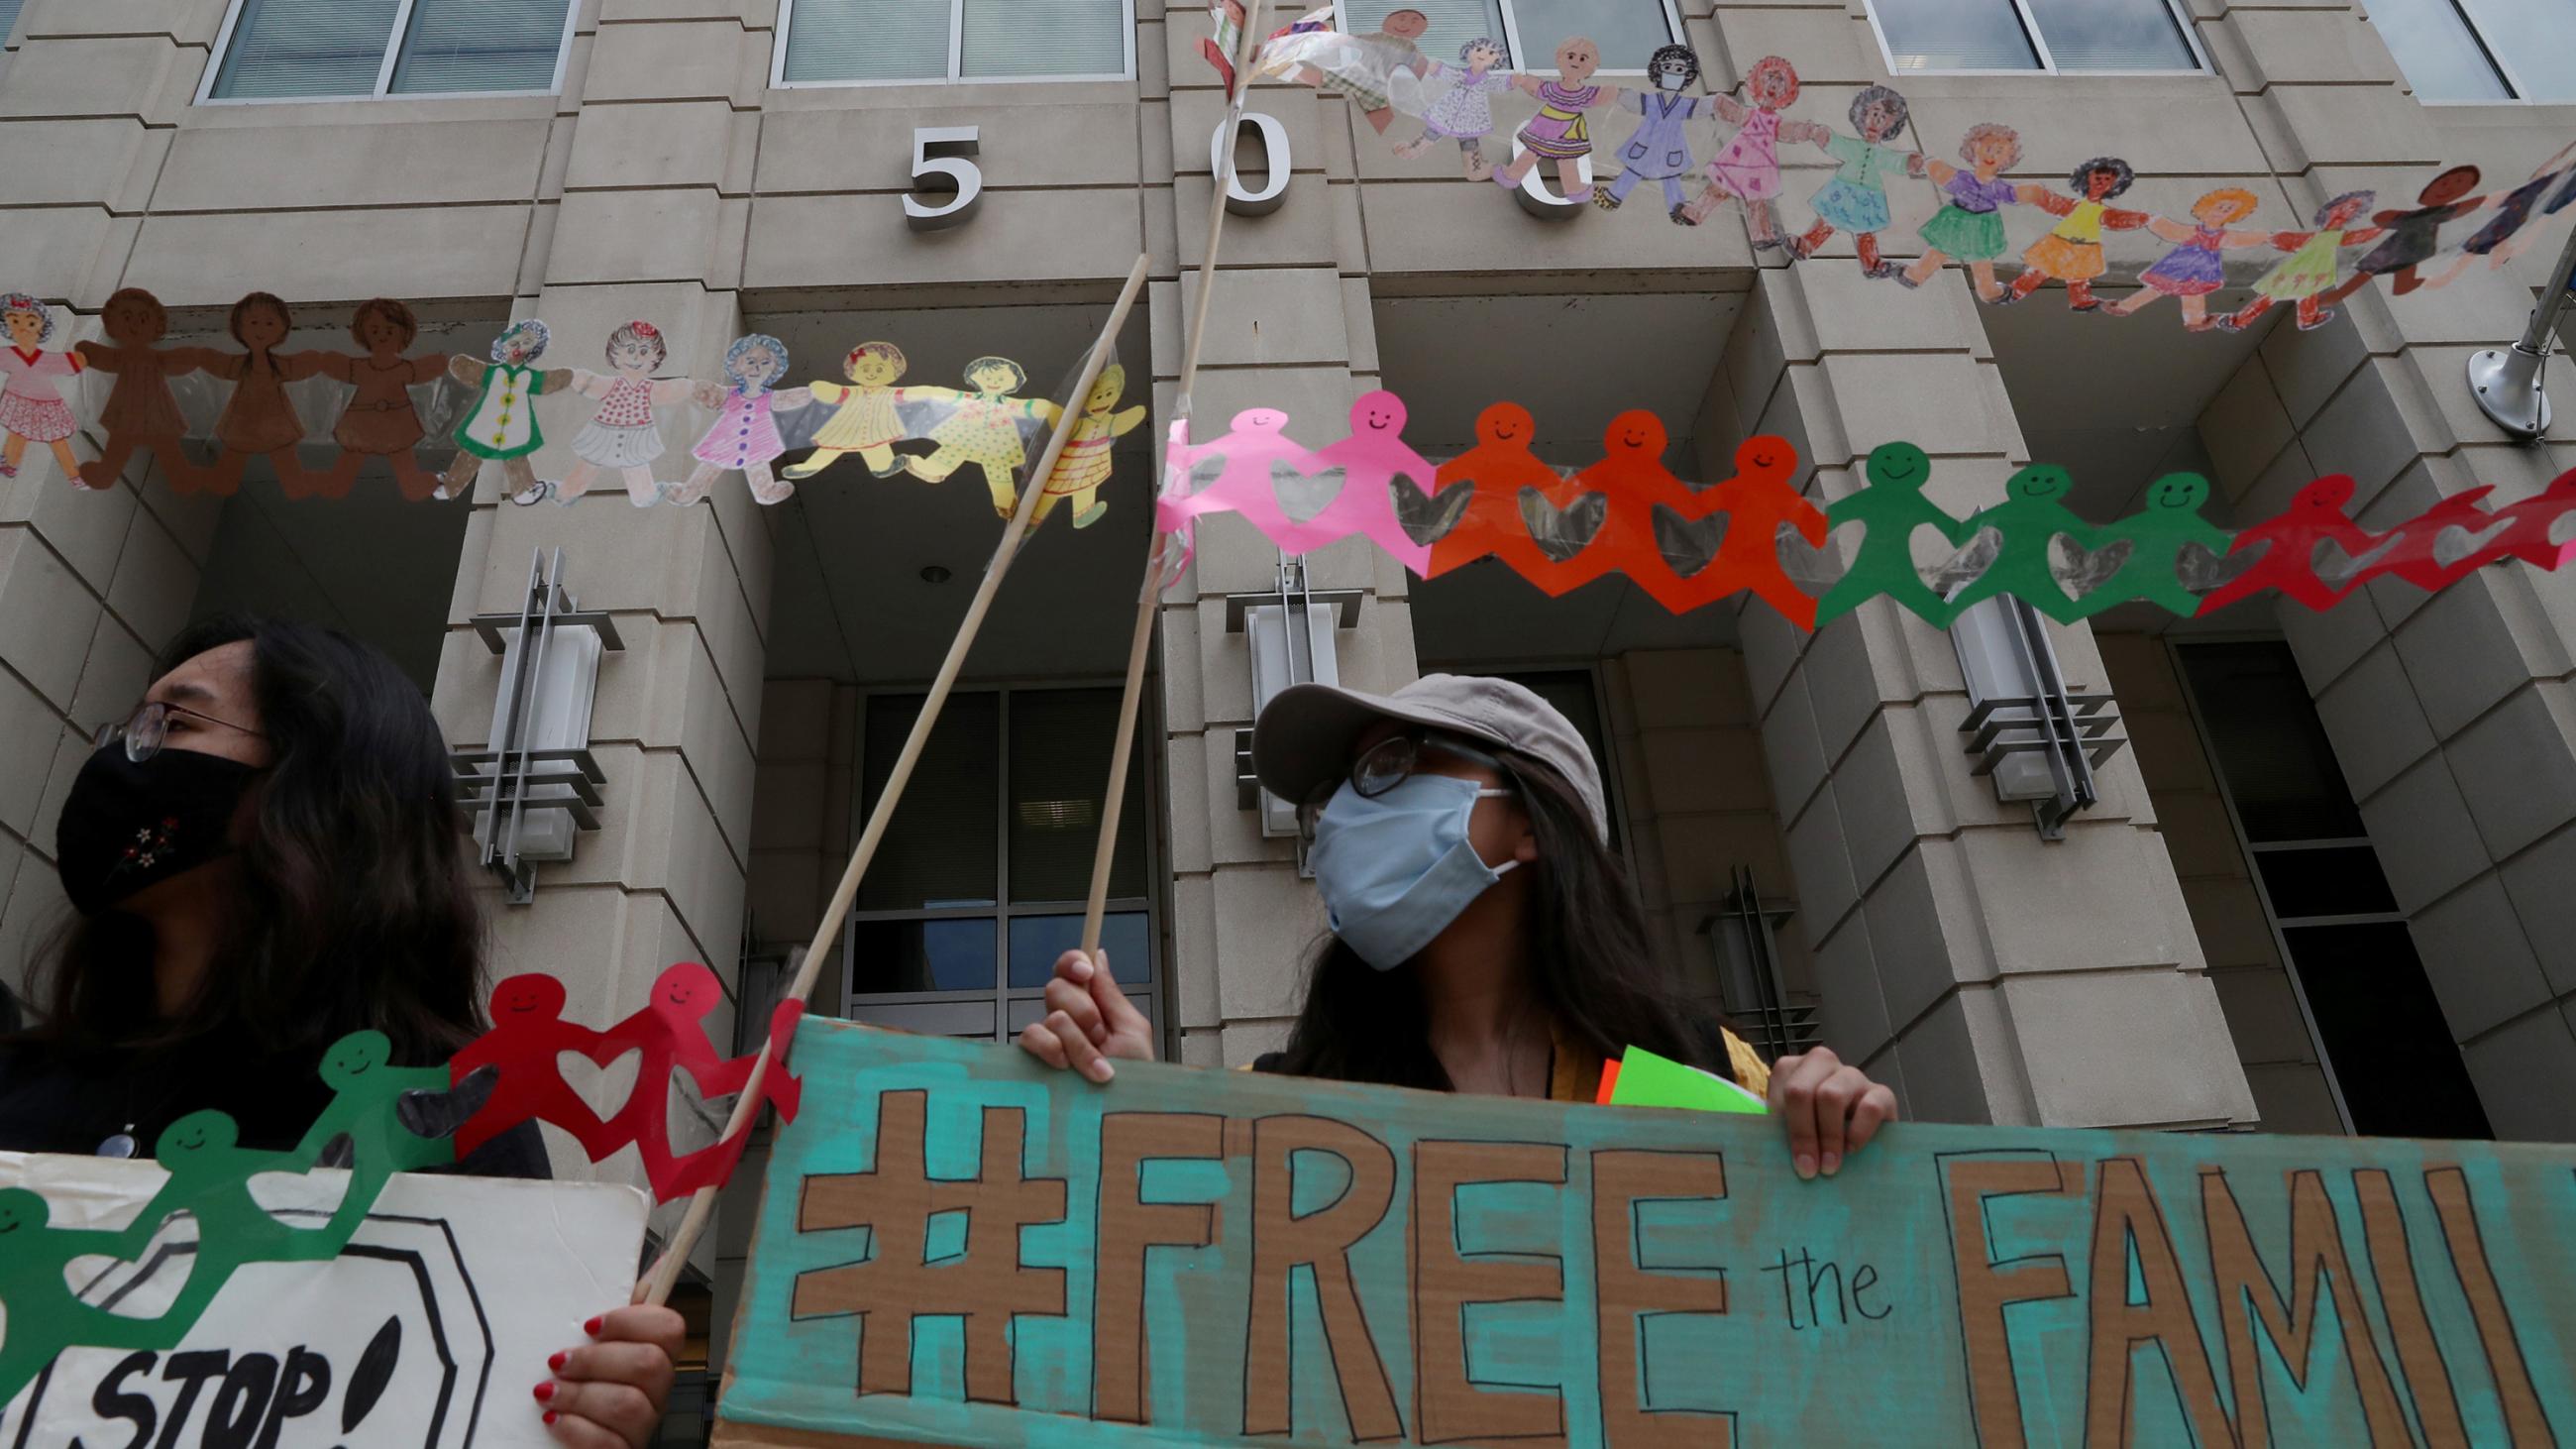 The photo shows a protester wearing a mask and holding a sign that "#FREE THE FAMILY." 